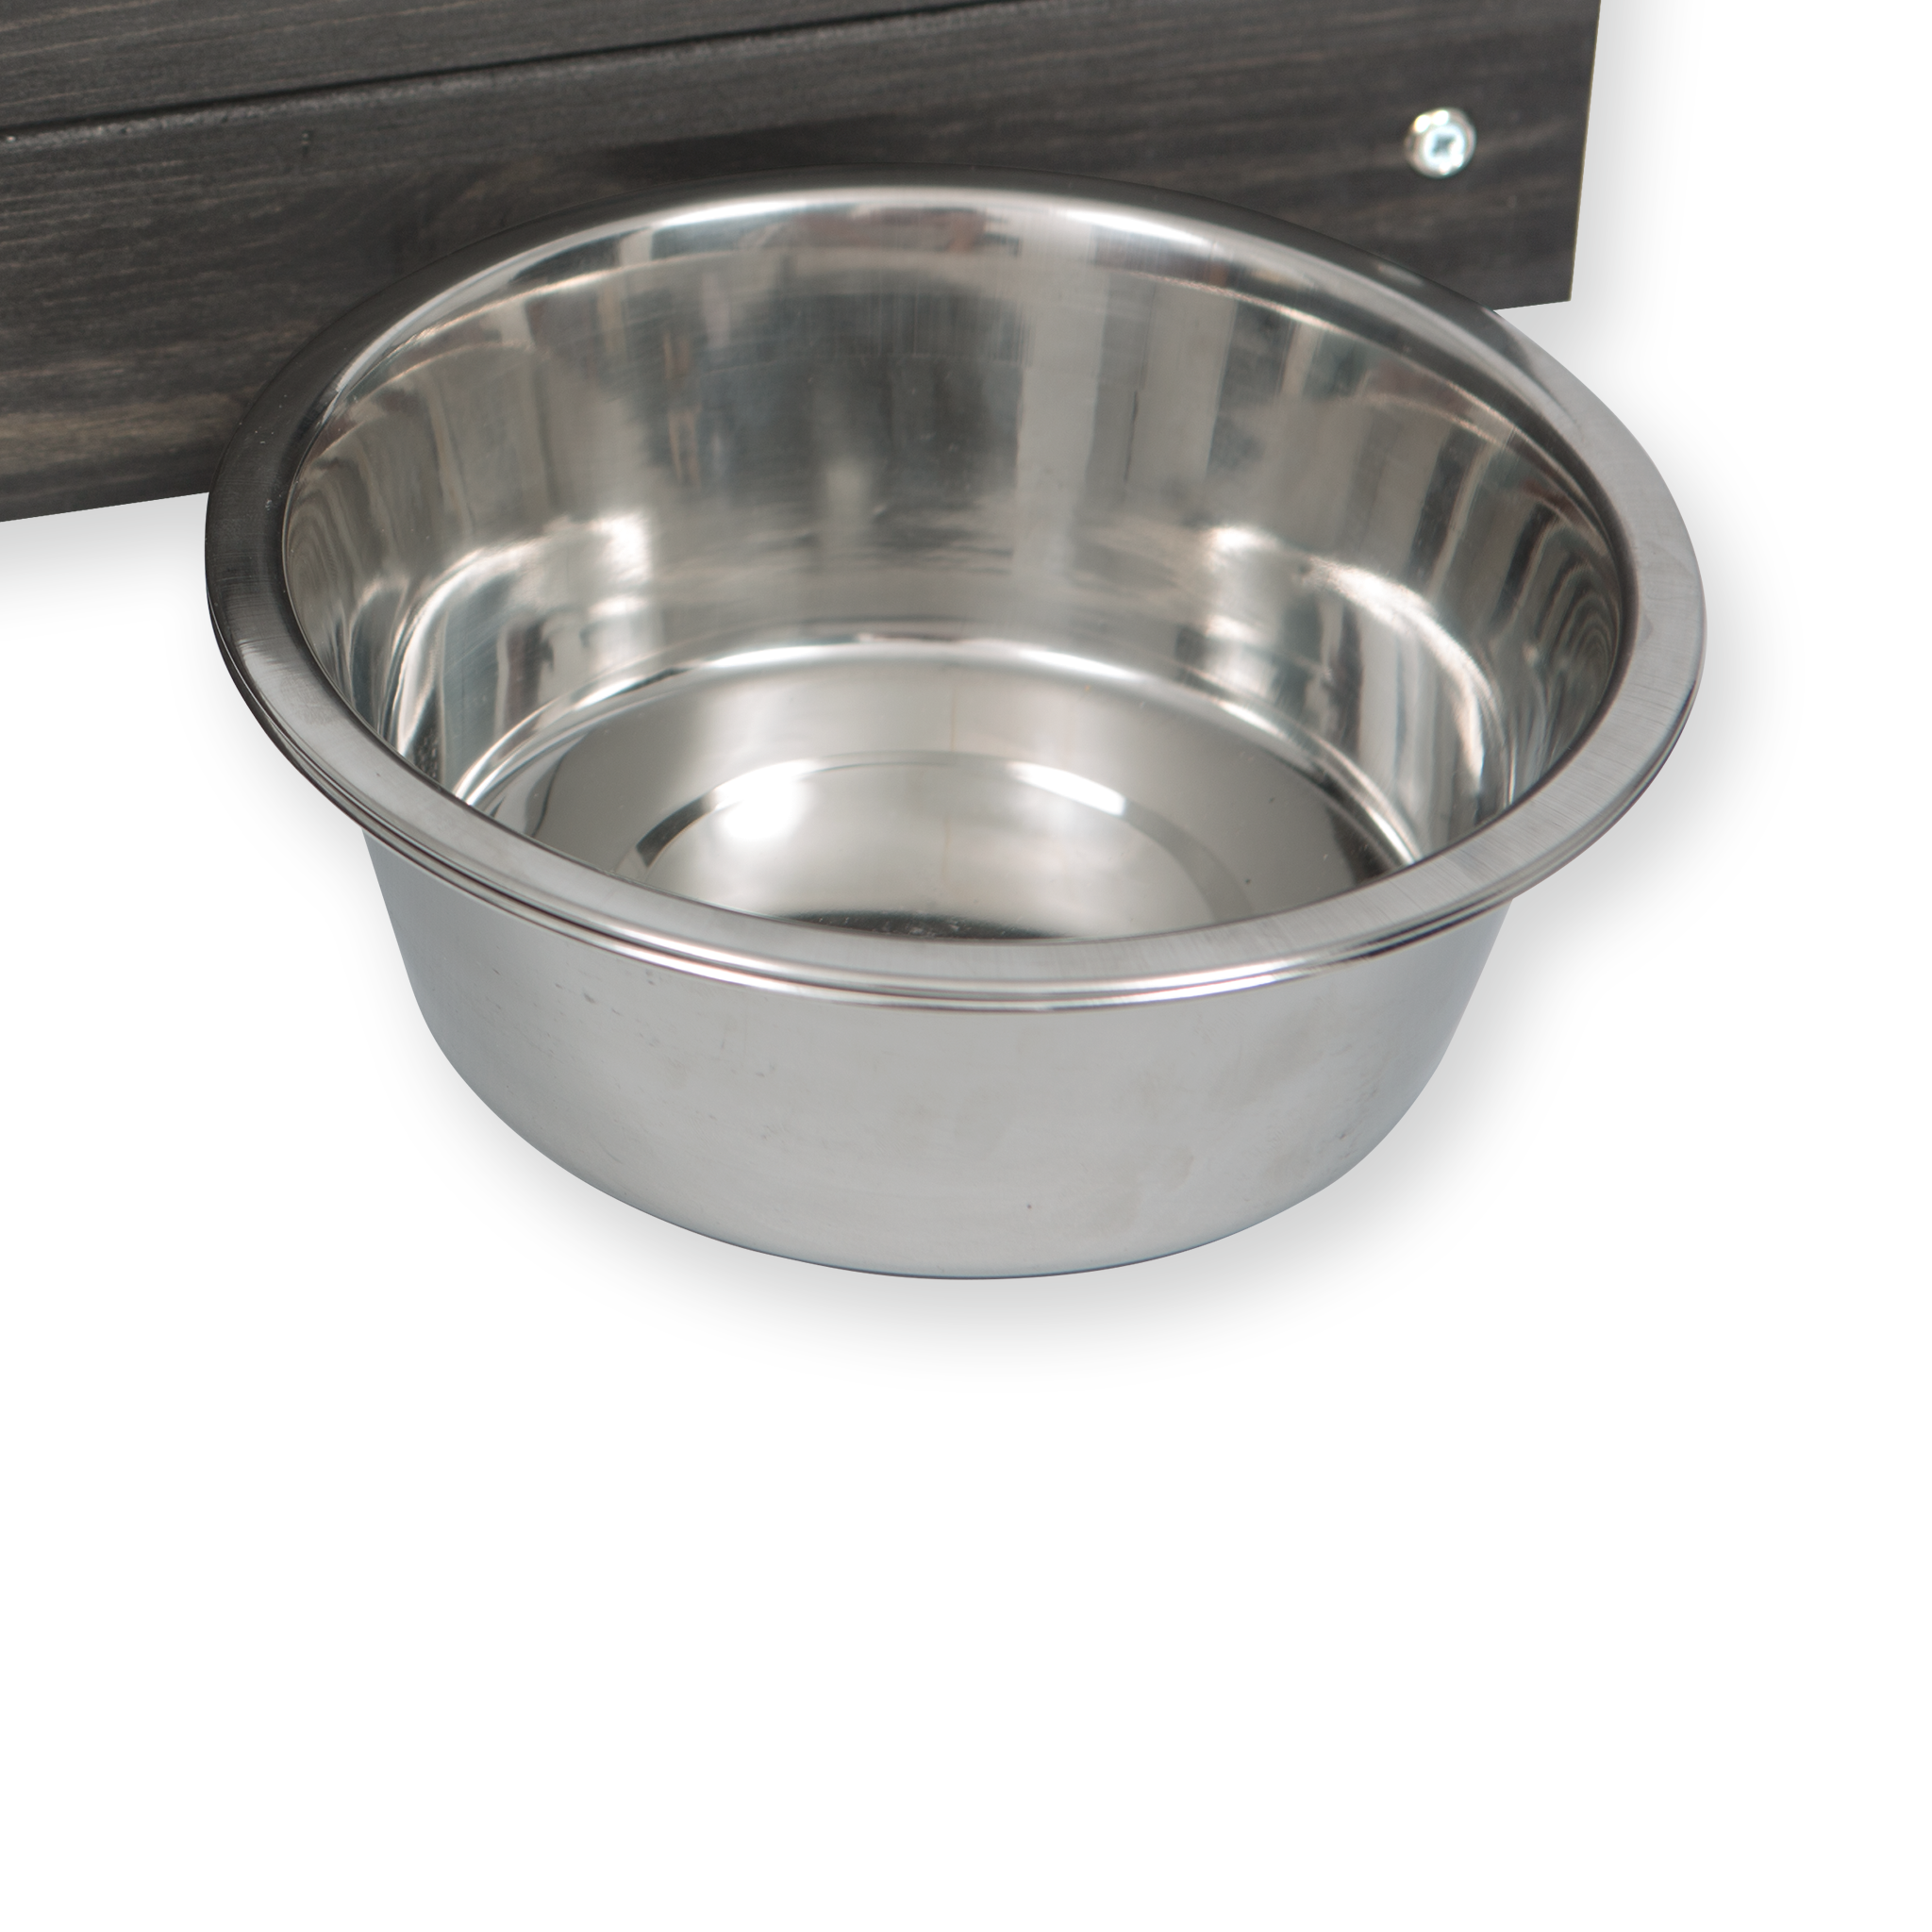 Triple Personalised Raised Cat Bowl Stand 10cm High - Ash Grey